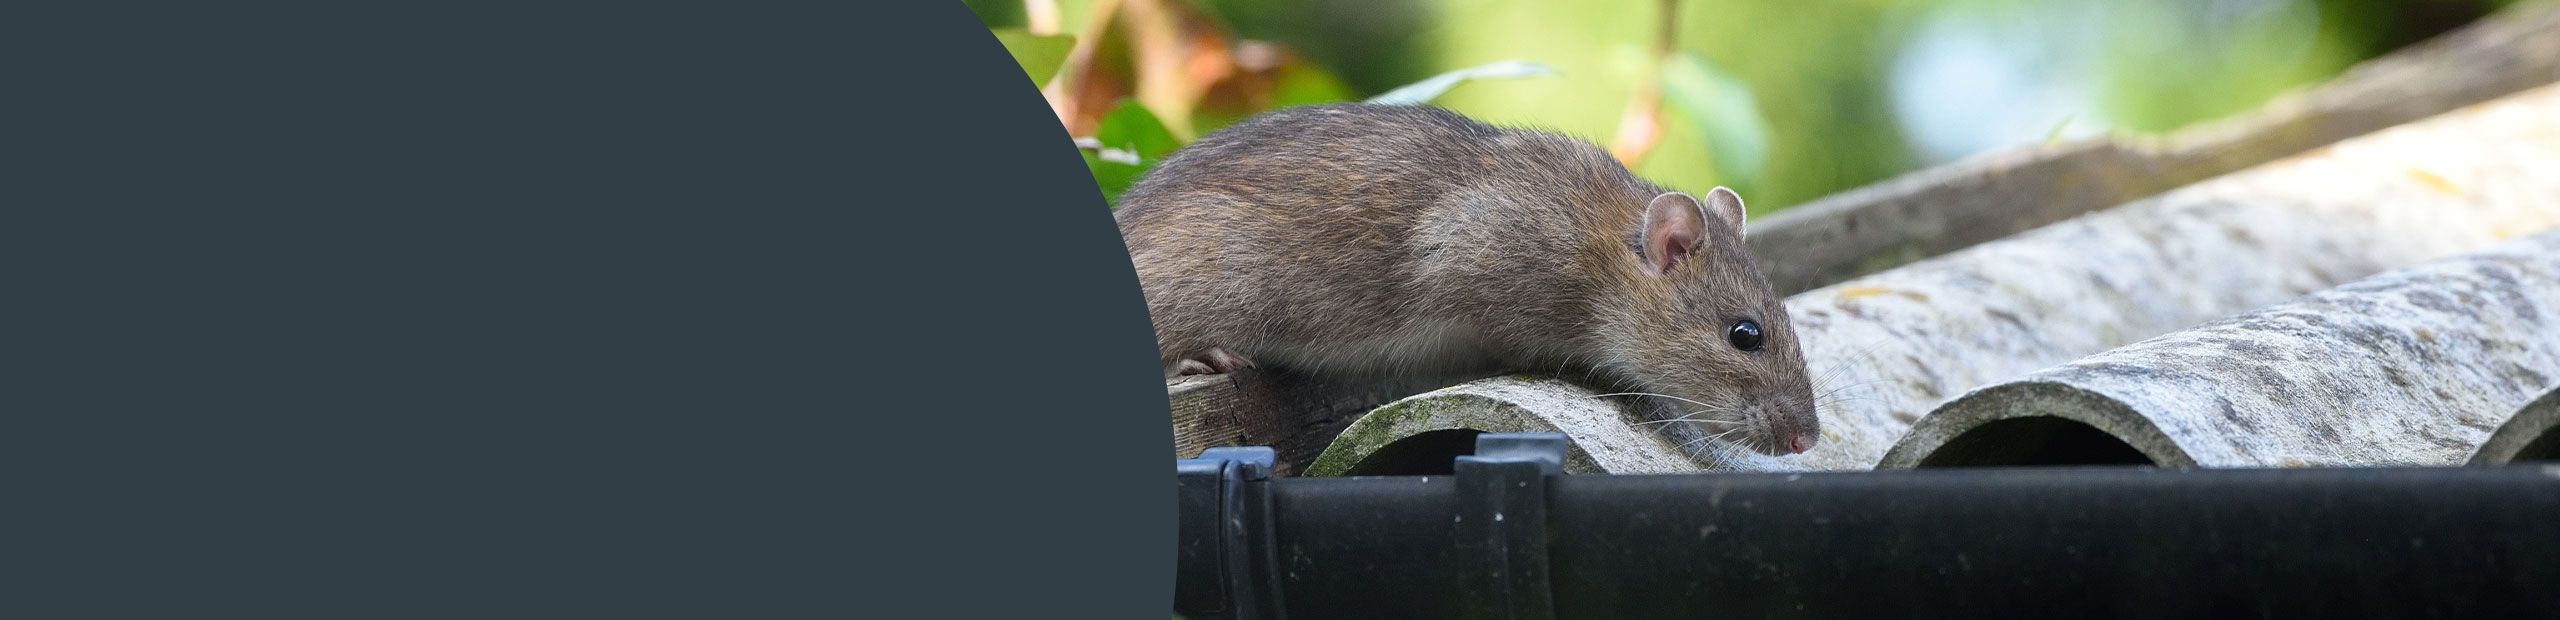 Rodent Removal Services - Harrow